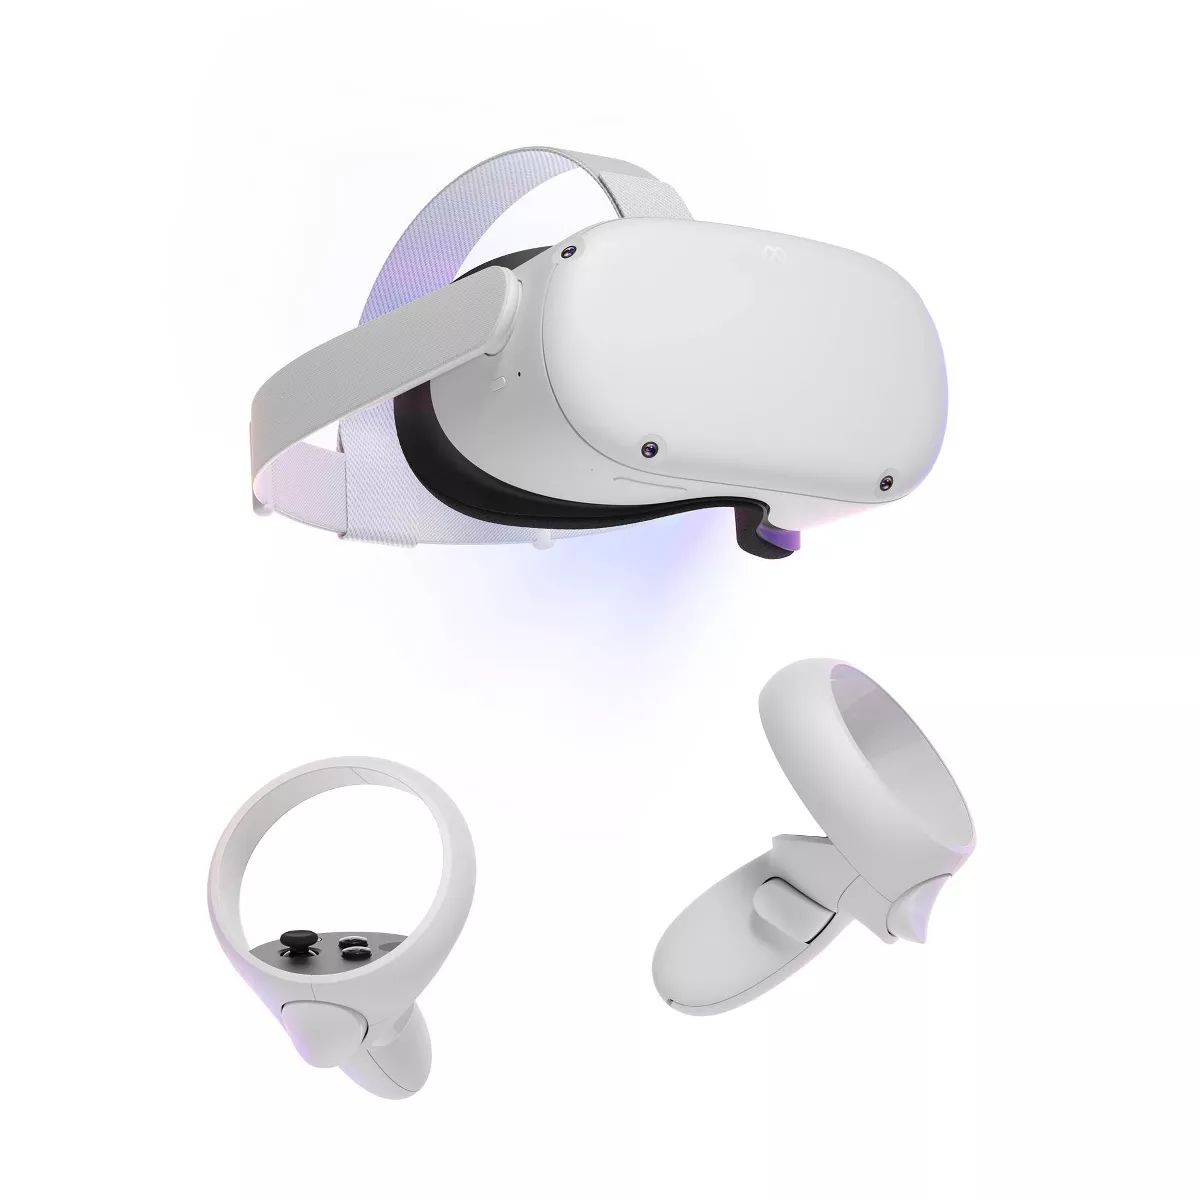 Meta Quest 2: Advanced All-In-One Virtual Reality Headset - 128GB | Target